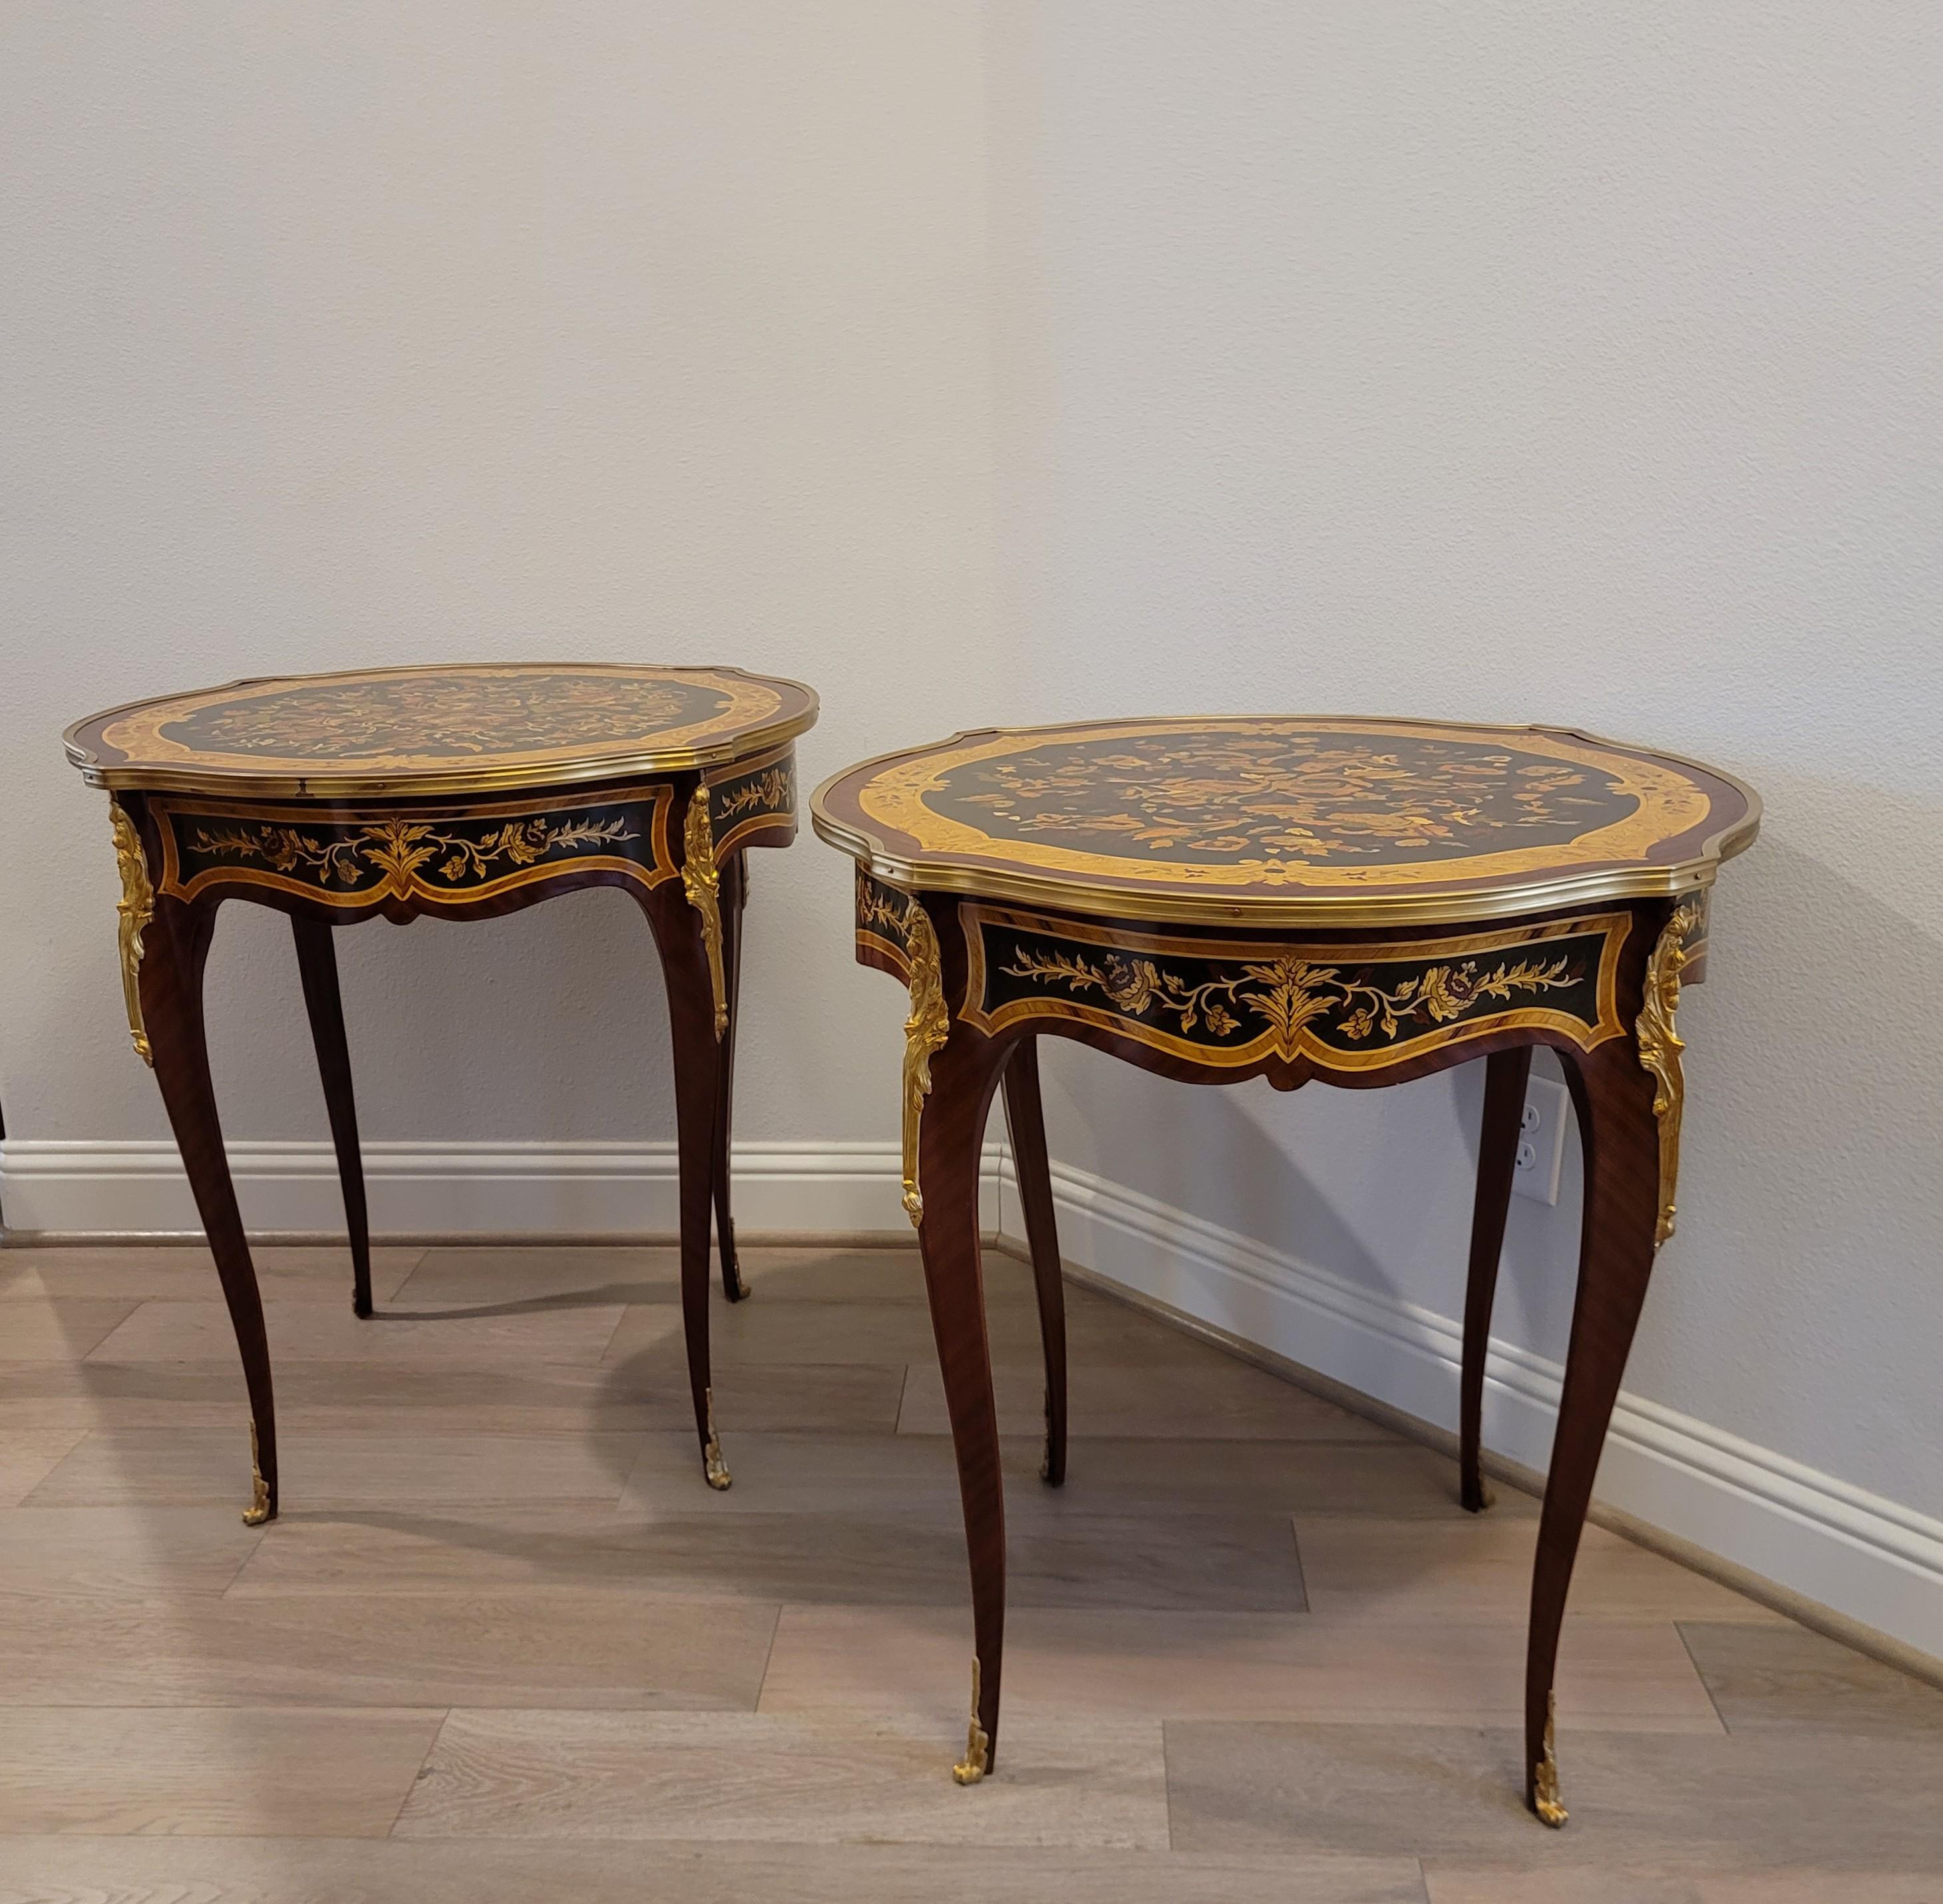 Fine Pair French Louis XV Style Gilt Bronze Mounted Floral Marquetry Side Tables For Sale 4